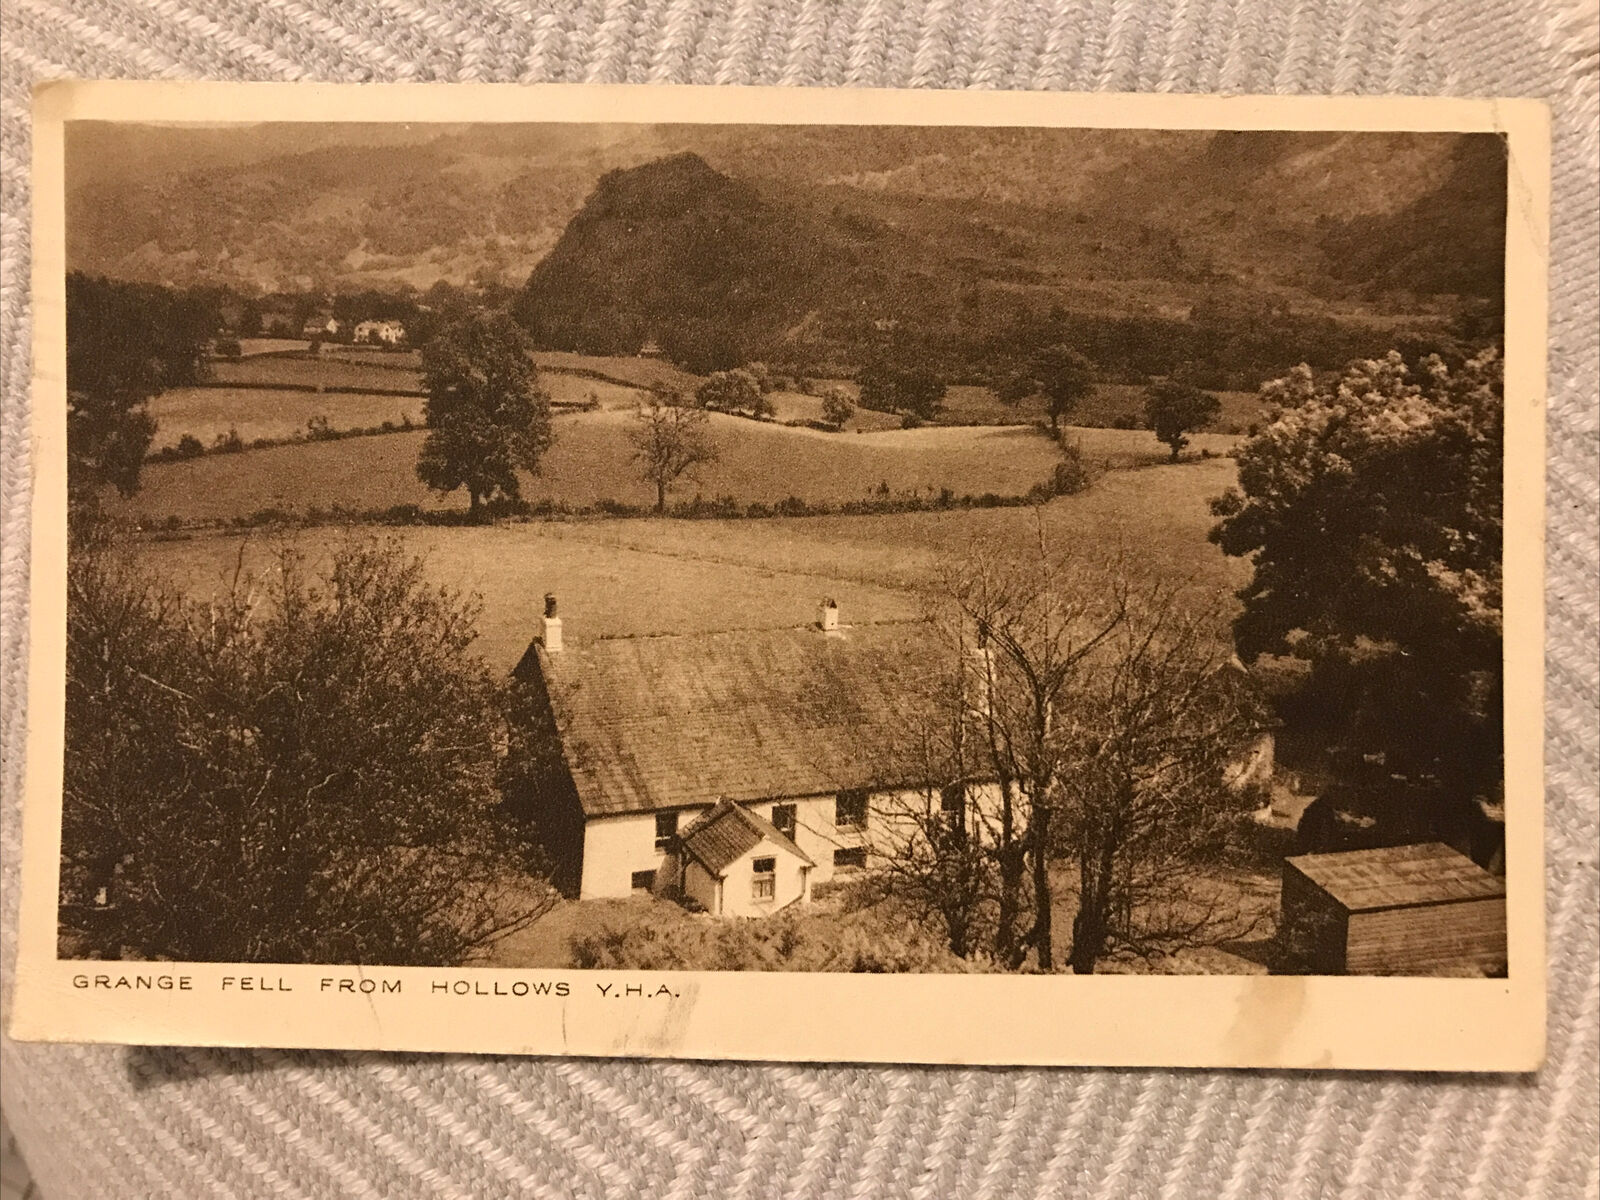 House Clearance - Grange Fell From Hollows YHA. Printed Service.